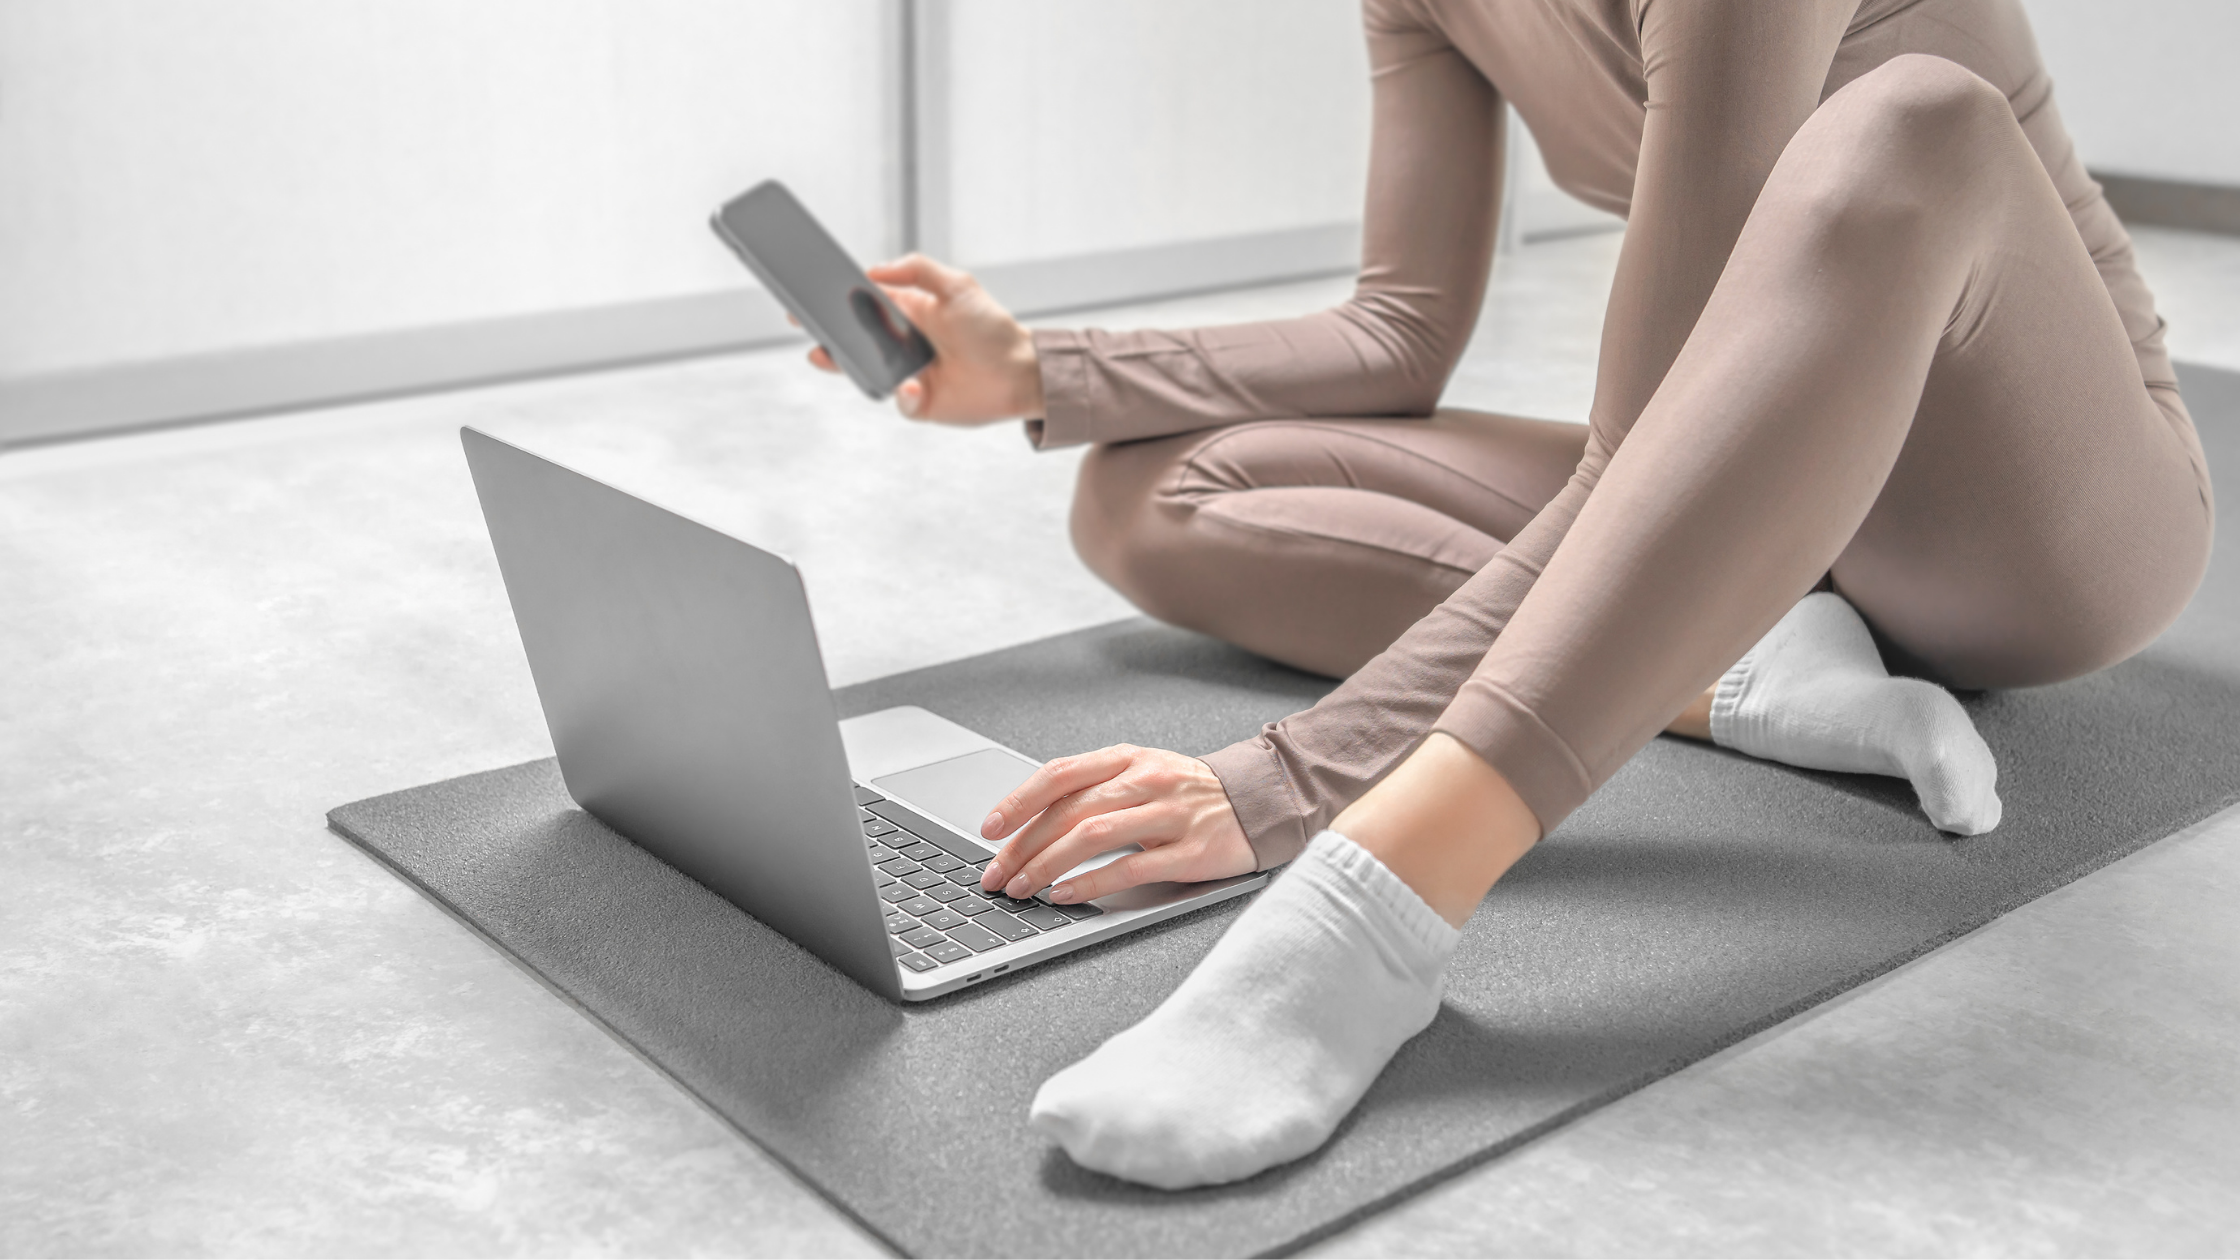 Person using their laptop and phone on a yoga mat